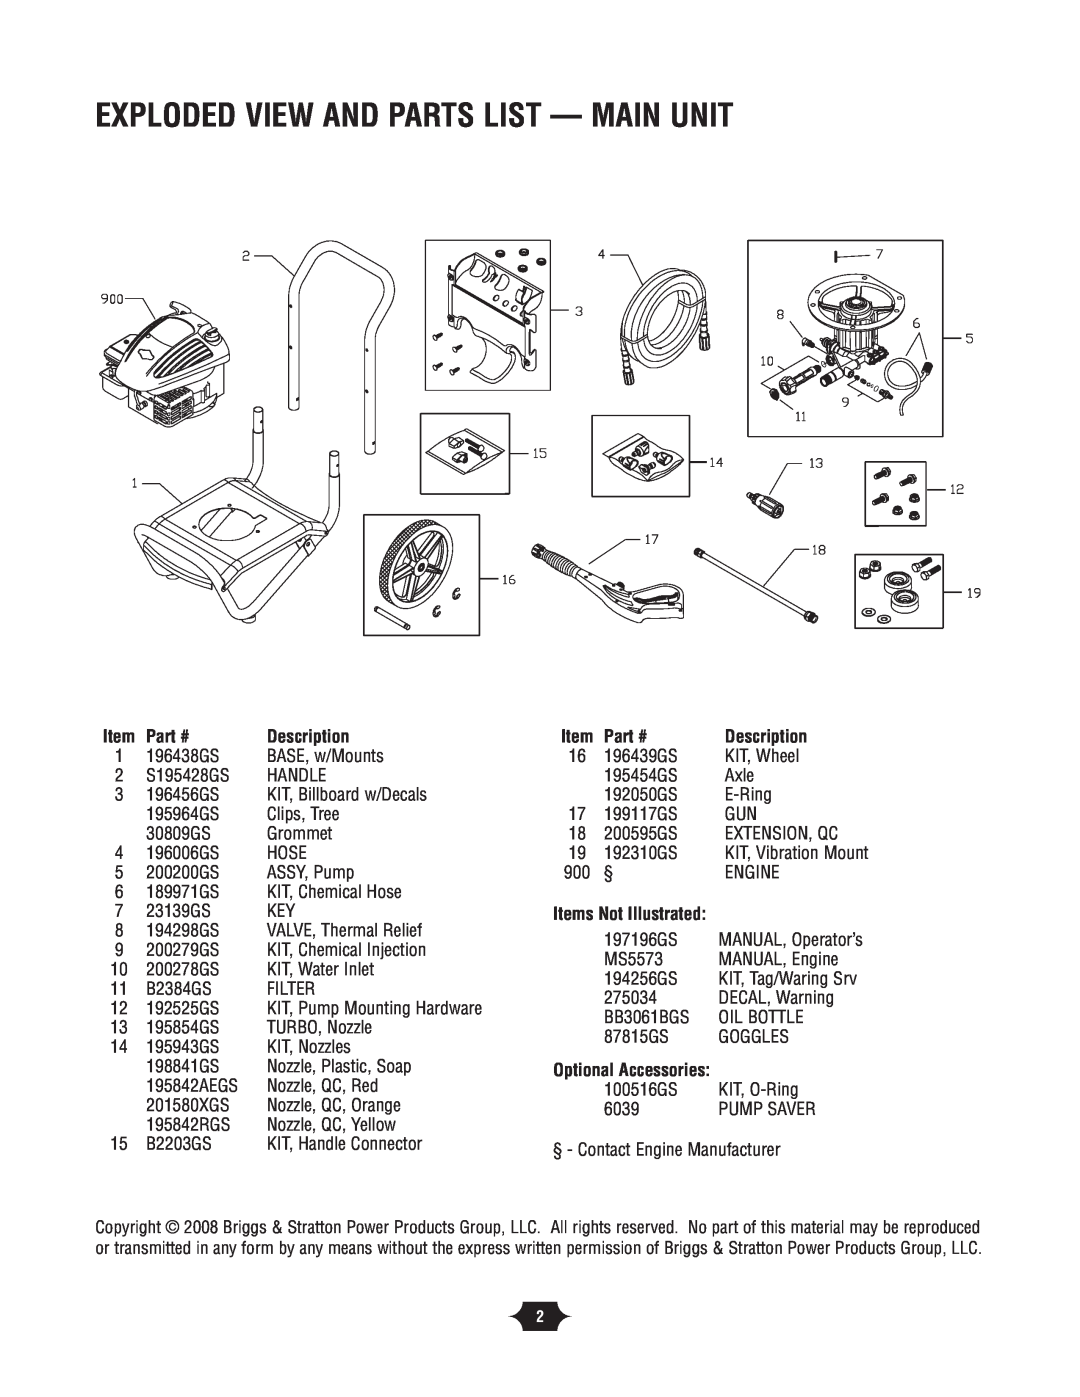 Briggs & Stratton 020228-2 manual Exploded View And Parts List - Main Unit, Description 